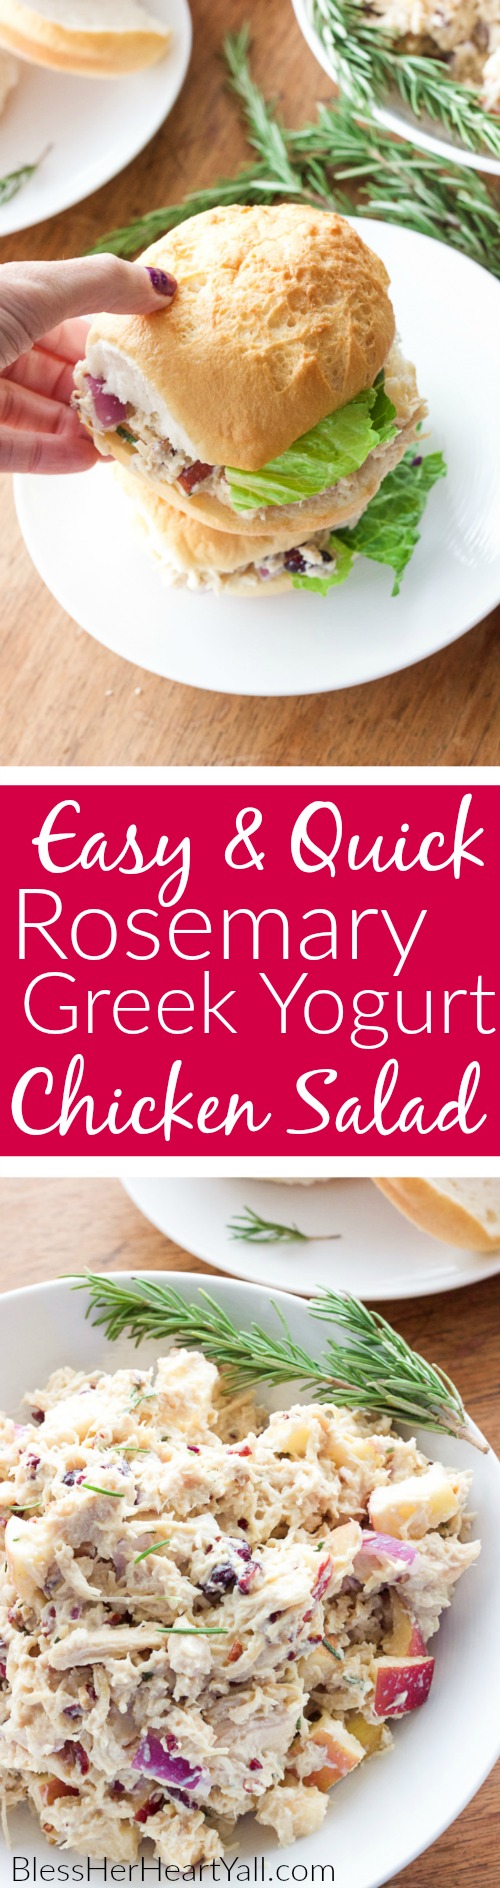 OMG yum! This rosemary greek yogurt chicken salad is a light and fresh (and gluten-free!) approach to chicken salad! The list of healthy ingredients come together to make one sweet and savory masterpiece of a salad or gluten free sandwich!